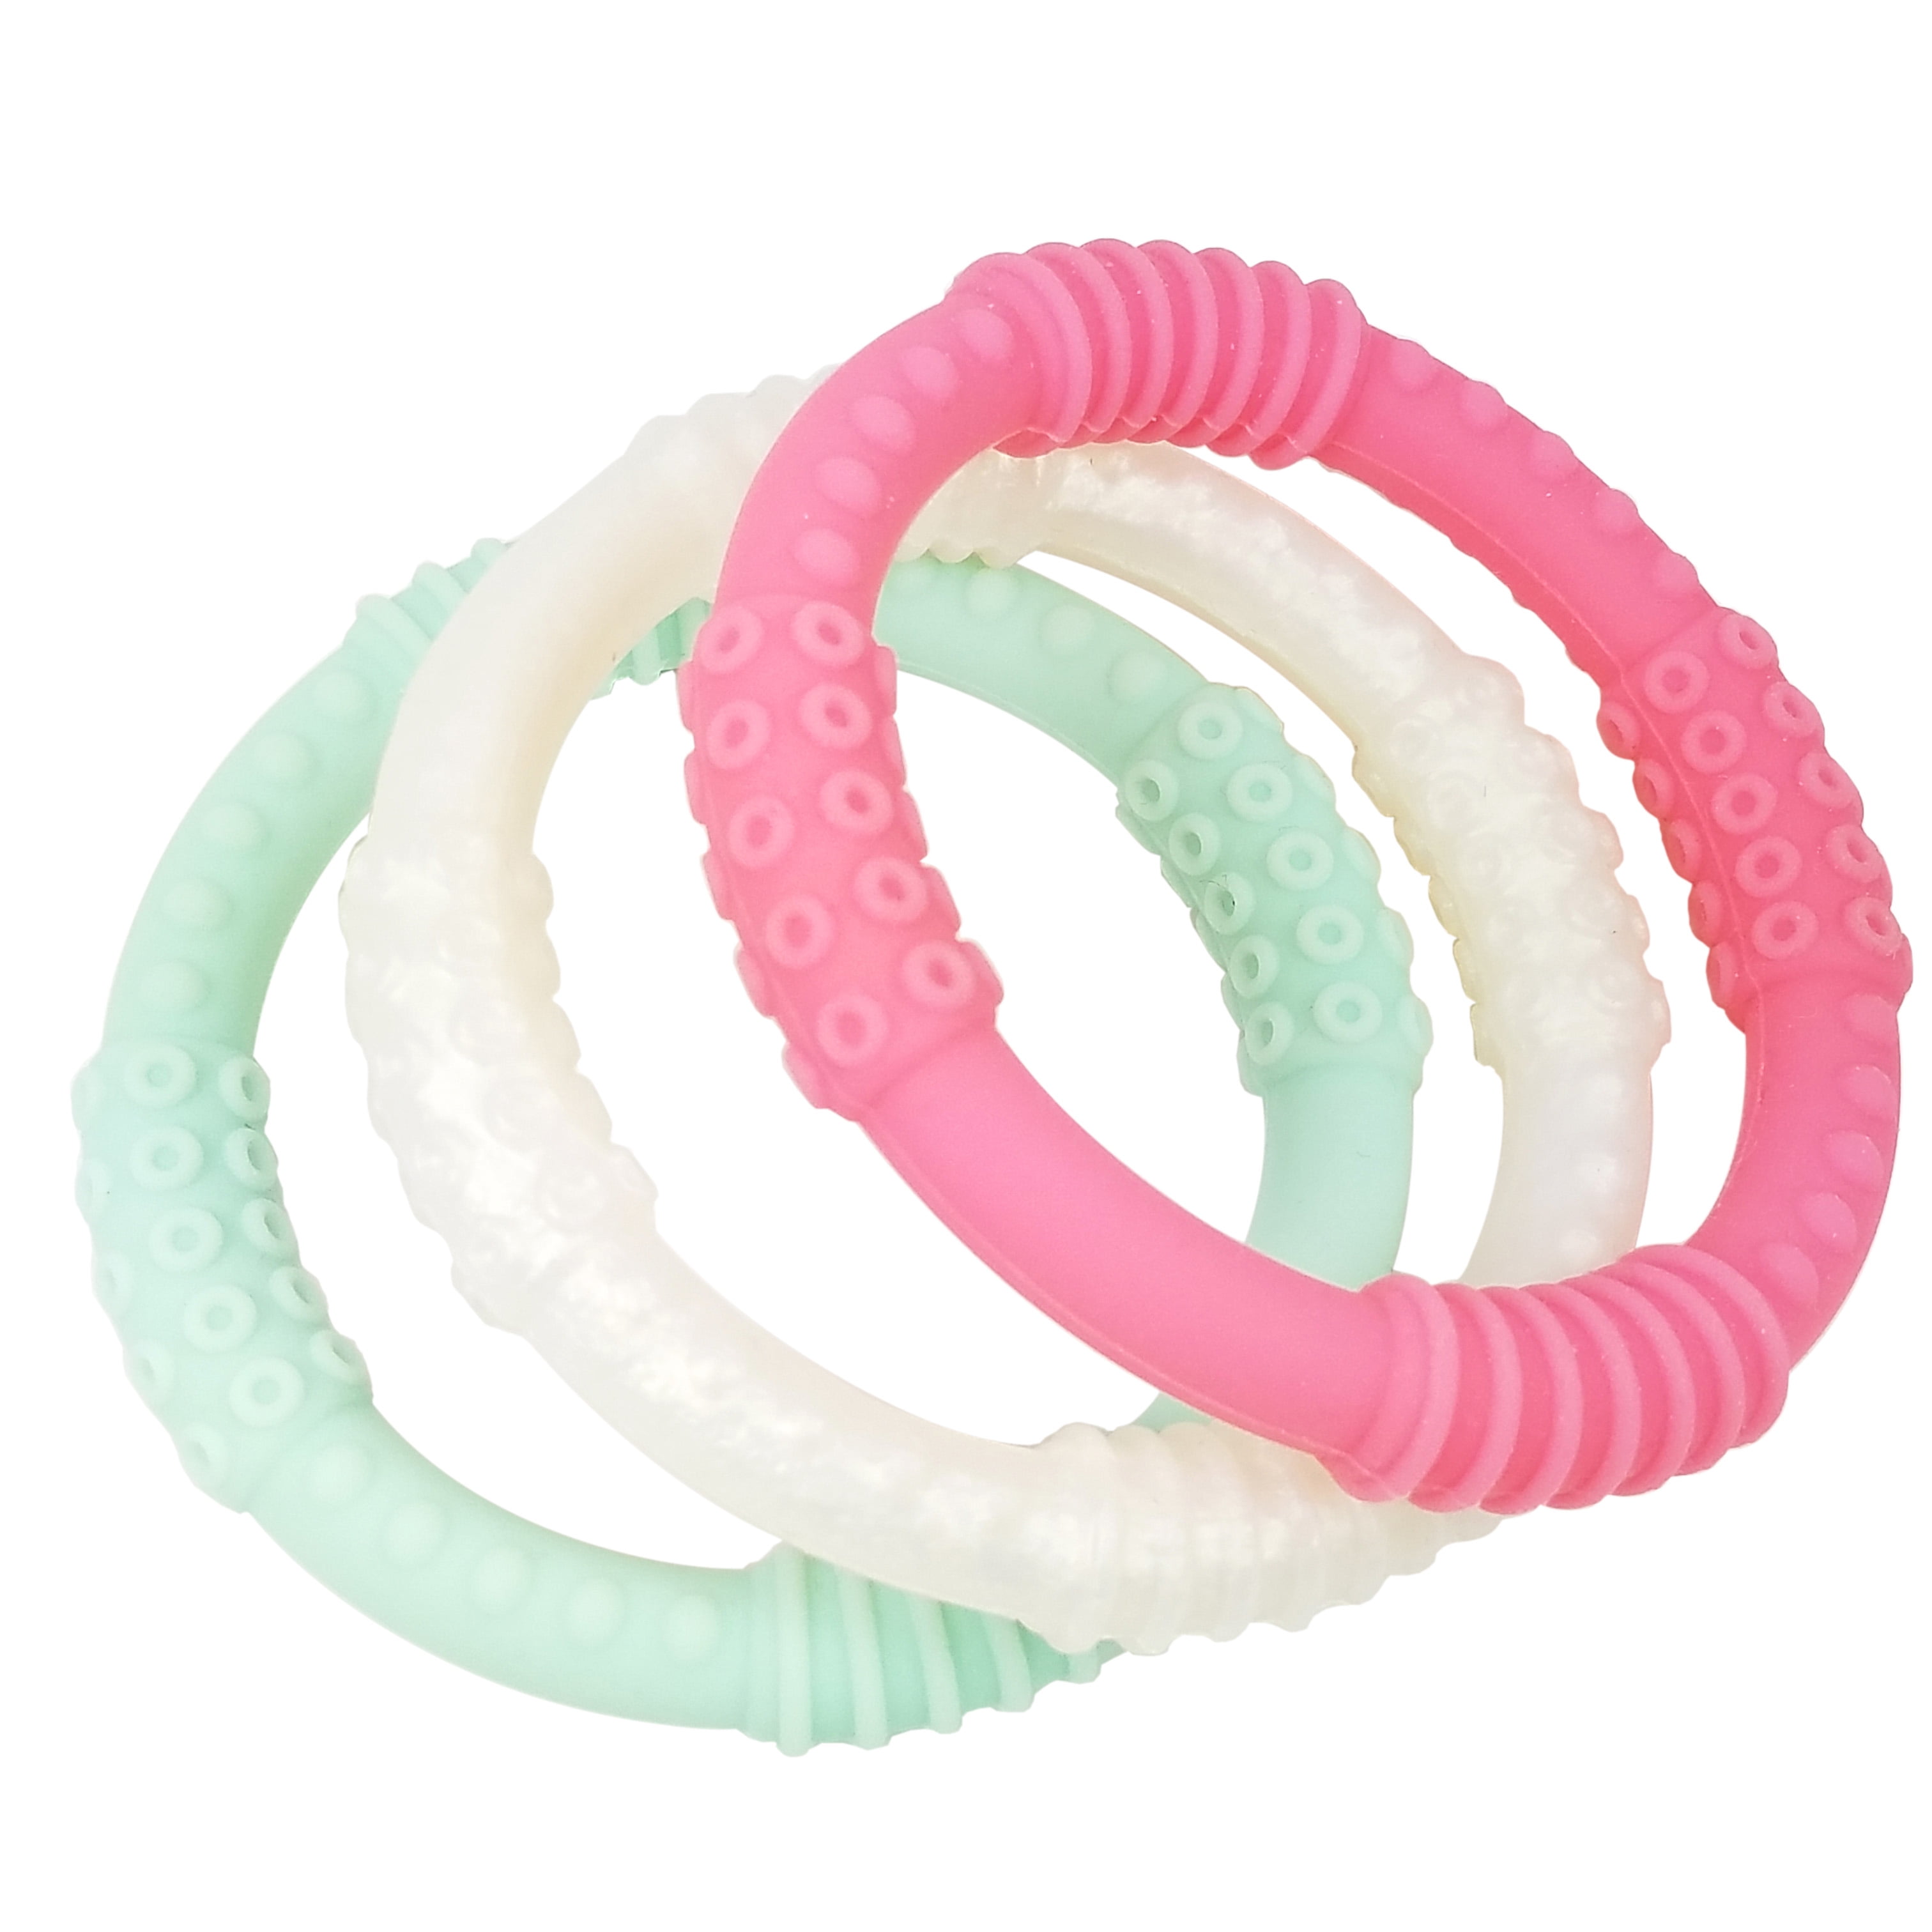 Baby Teething Ring 3 Pack - mooi baby - 100% Silicone Infant Baby Teether  Toy - Walmart.com